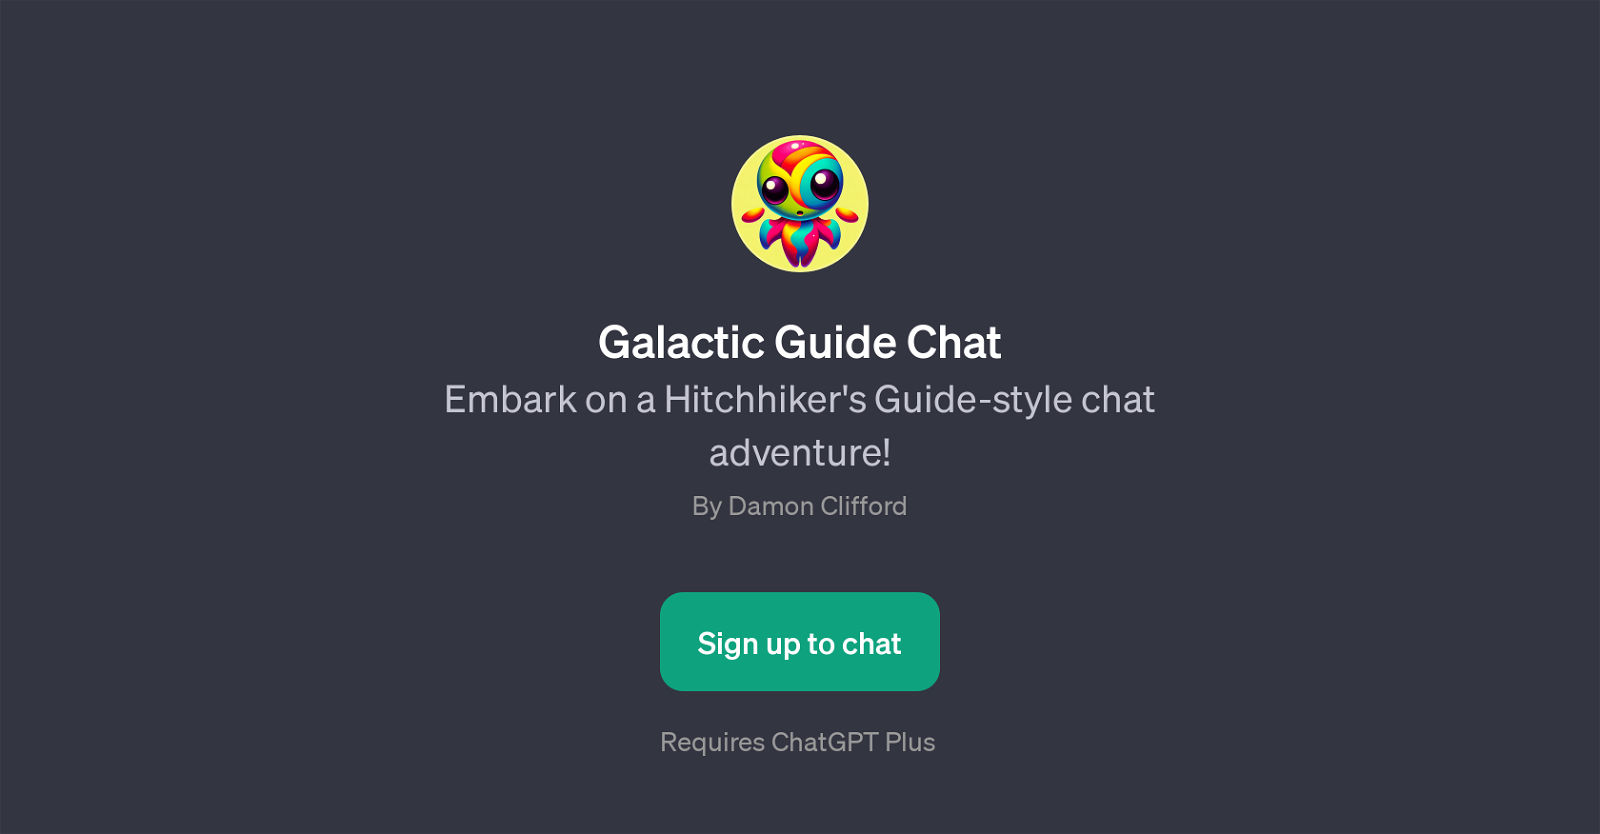 Galactic Guide Chat website